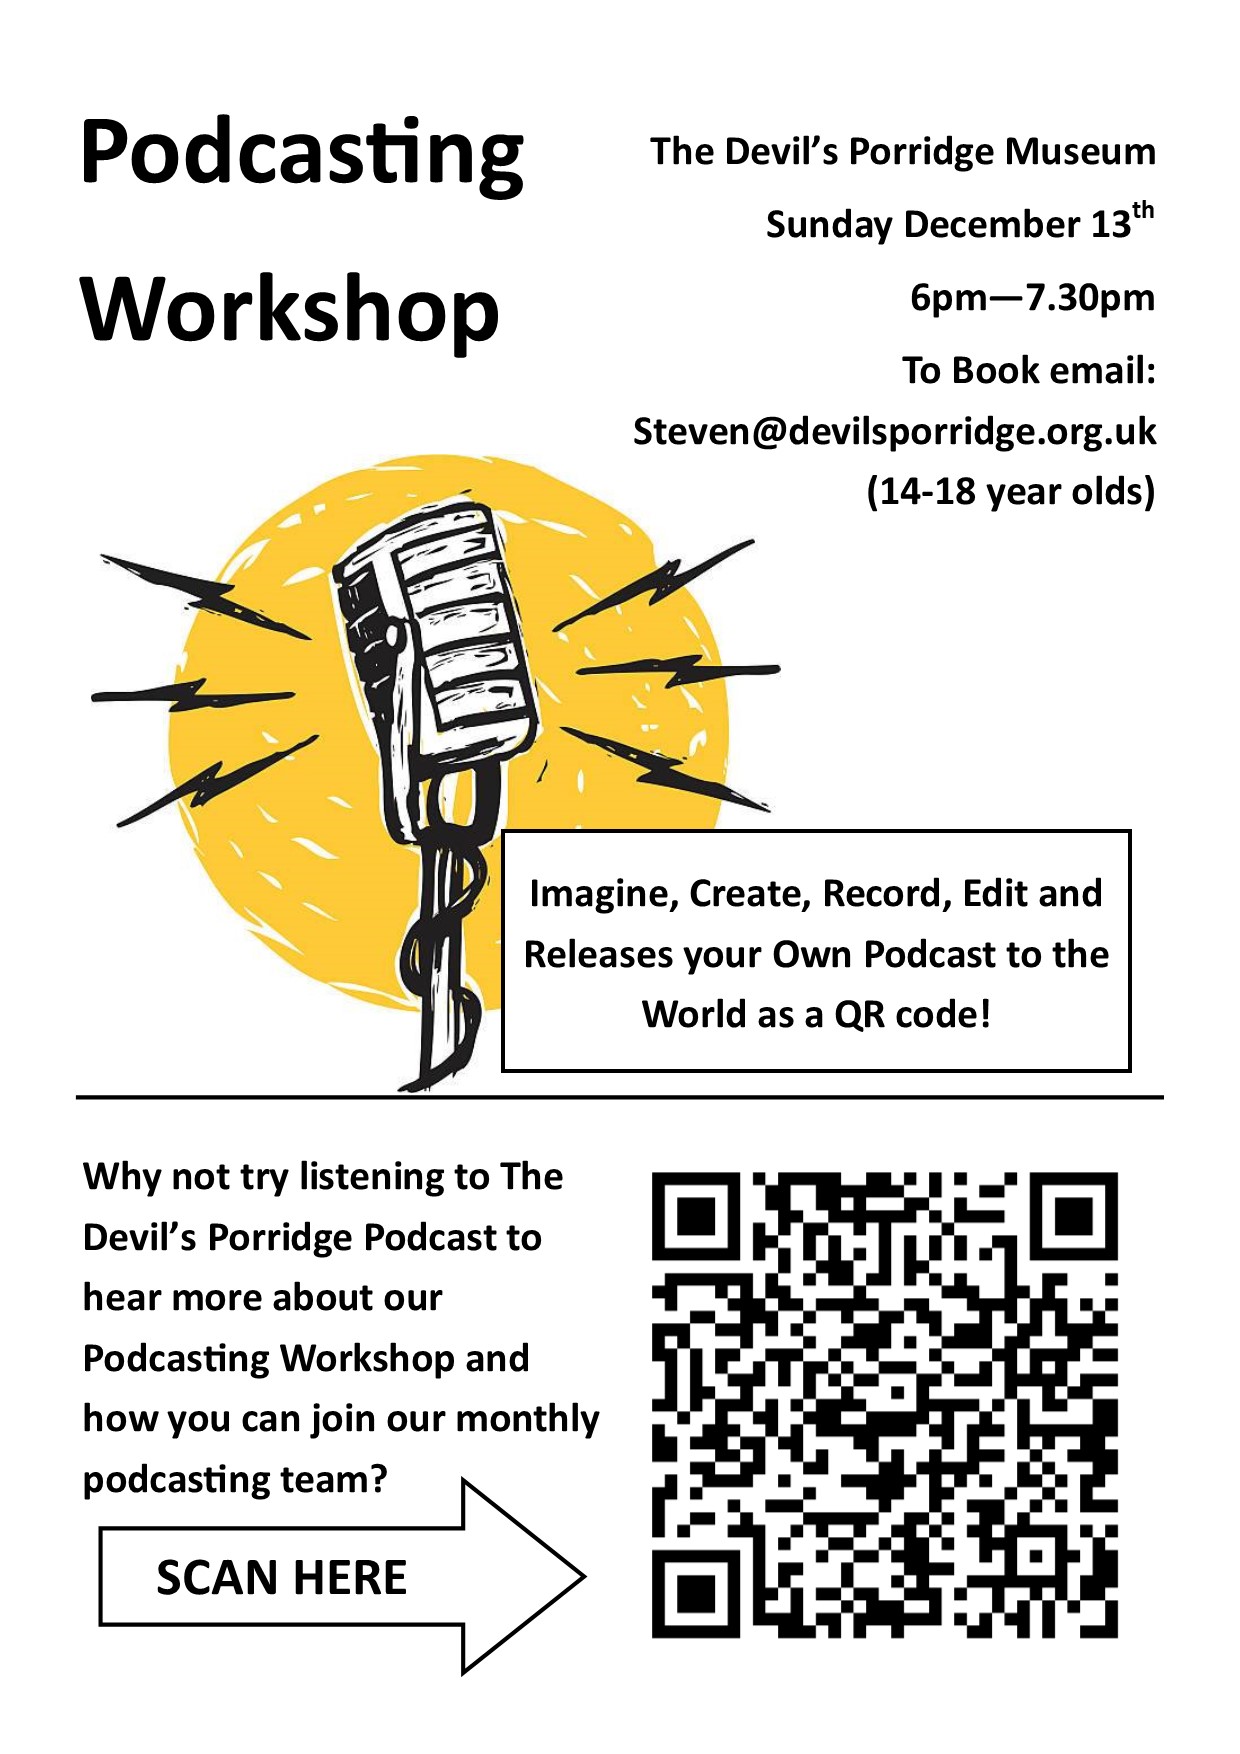 Poster for a podcasting workshop on Sunday December 13th 2020.